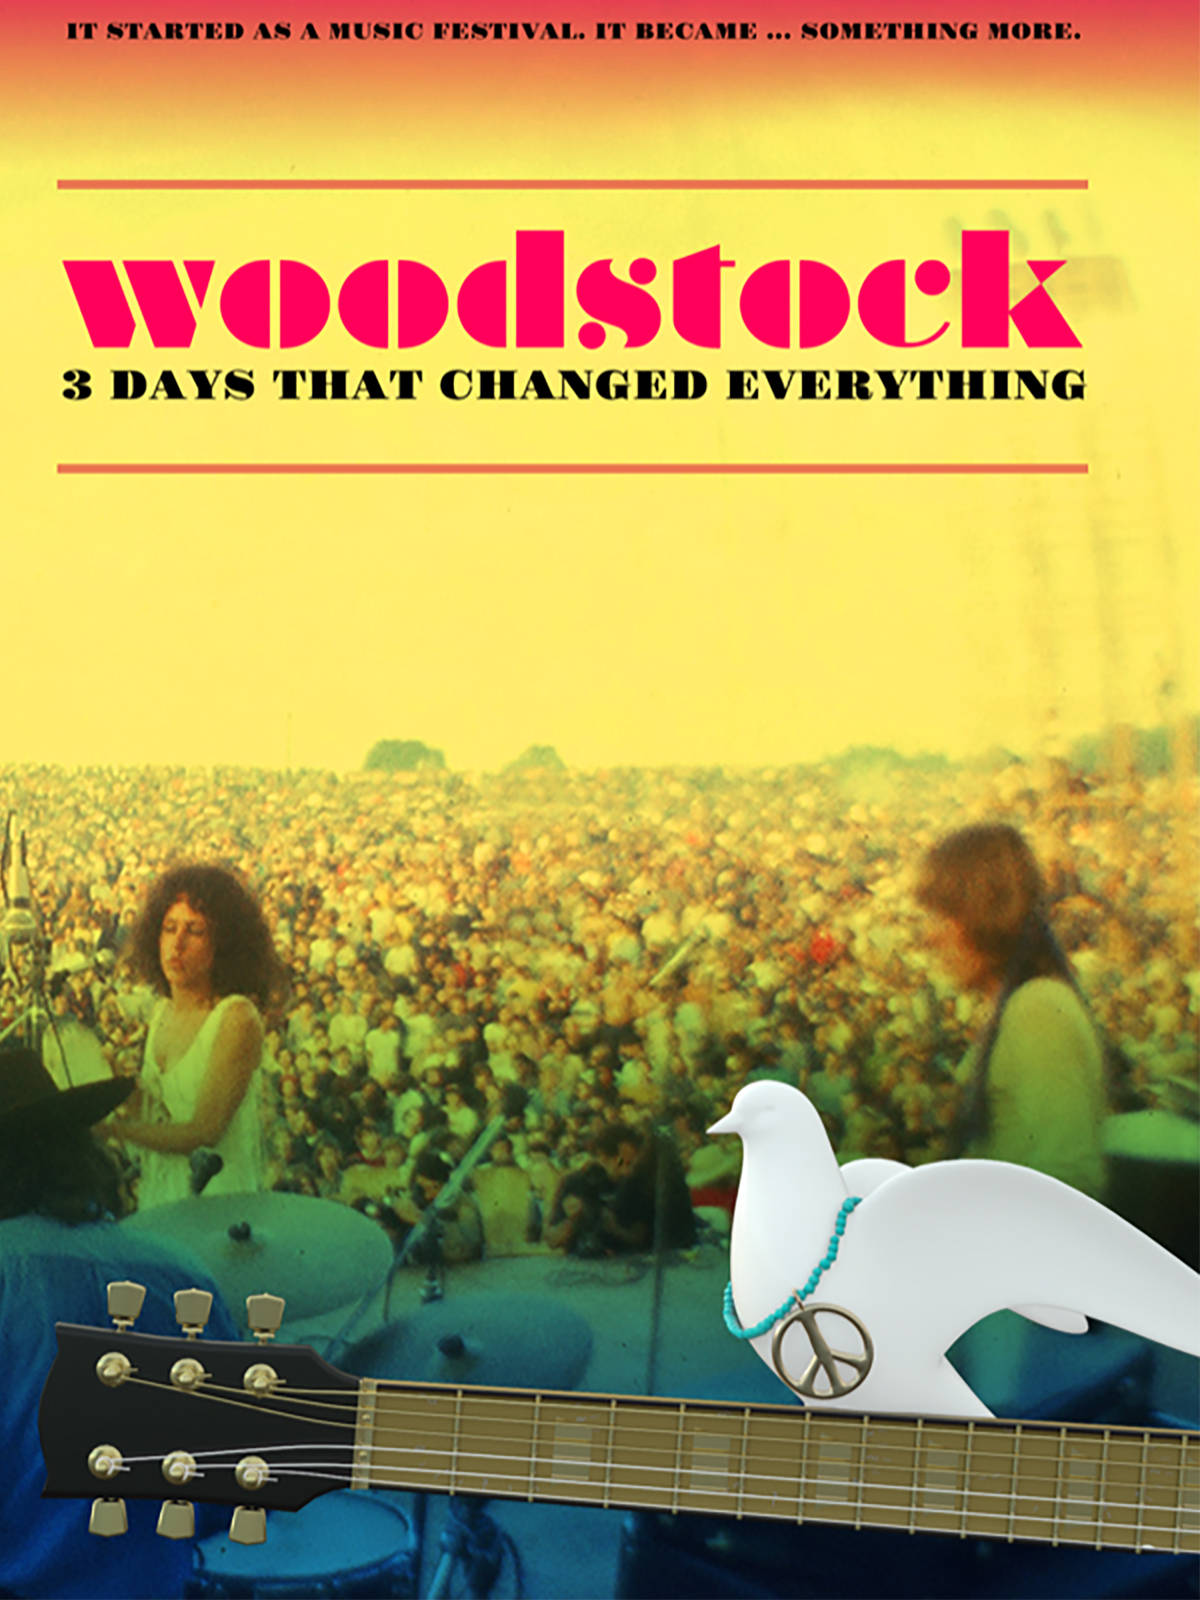 Woodstock: 3 Days That Changed Everything Background